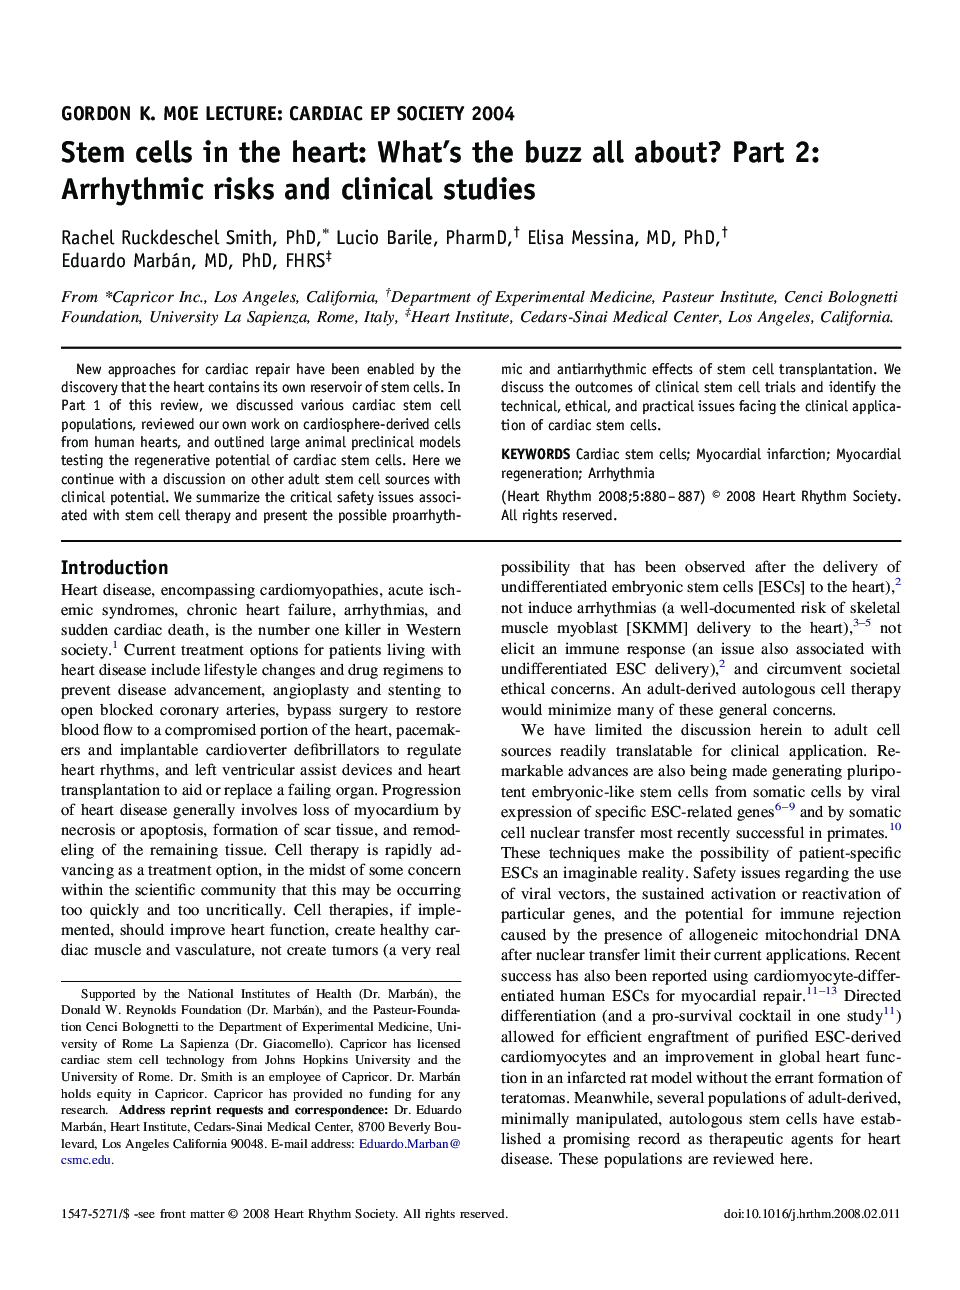 Stem cells in the heart: What's the buzz all about? Part 2: Arrhythmic risks and clinical studies